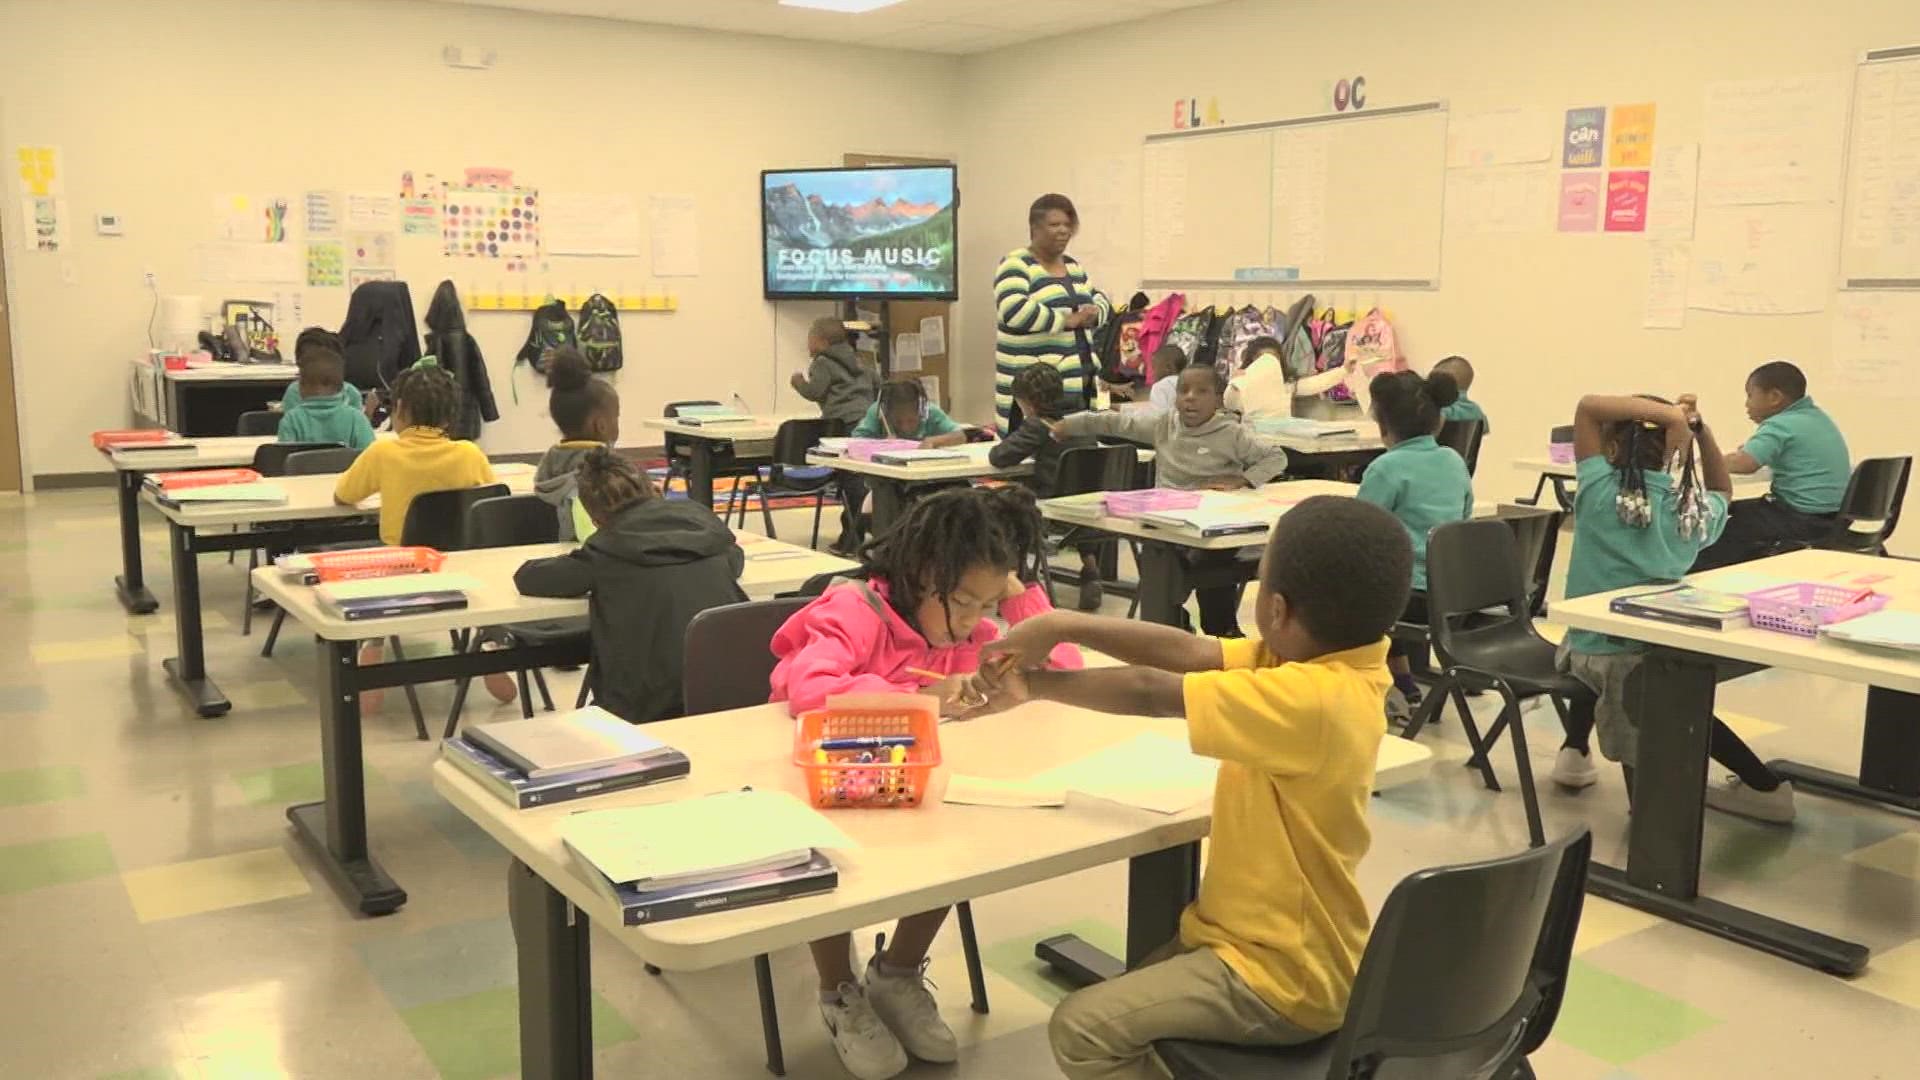 Take a look inside St. Louis County's first charter school